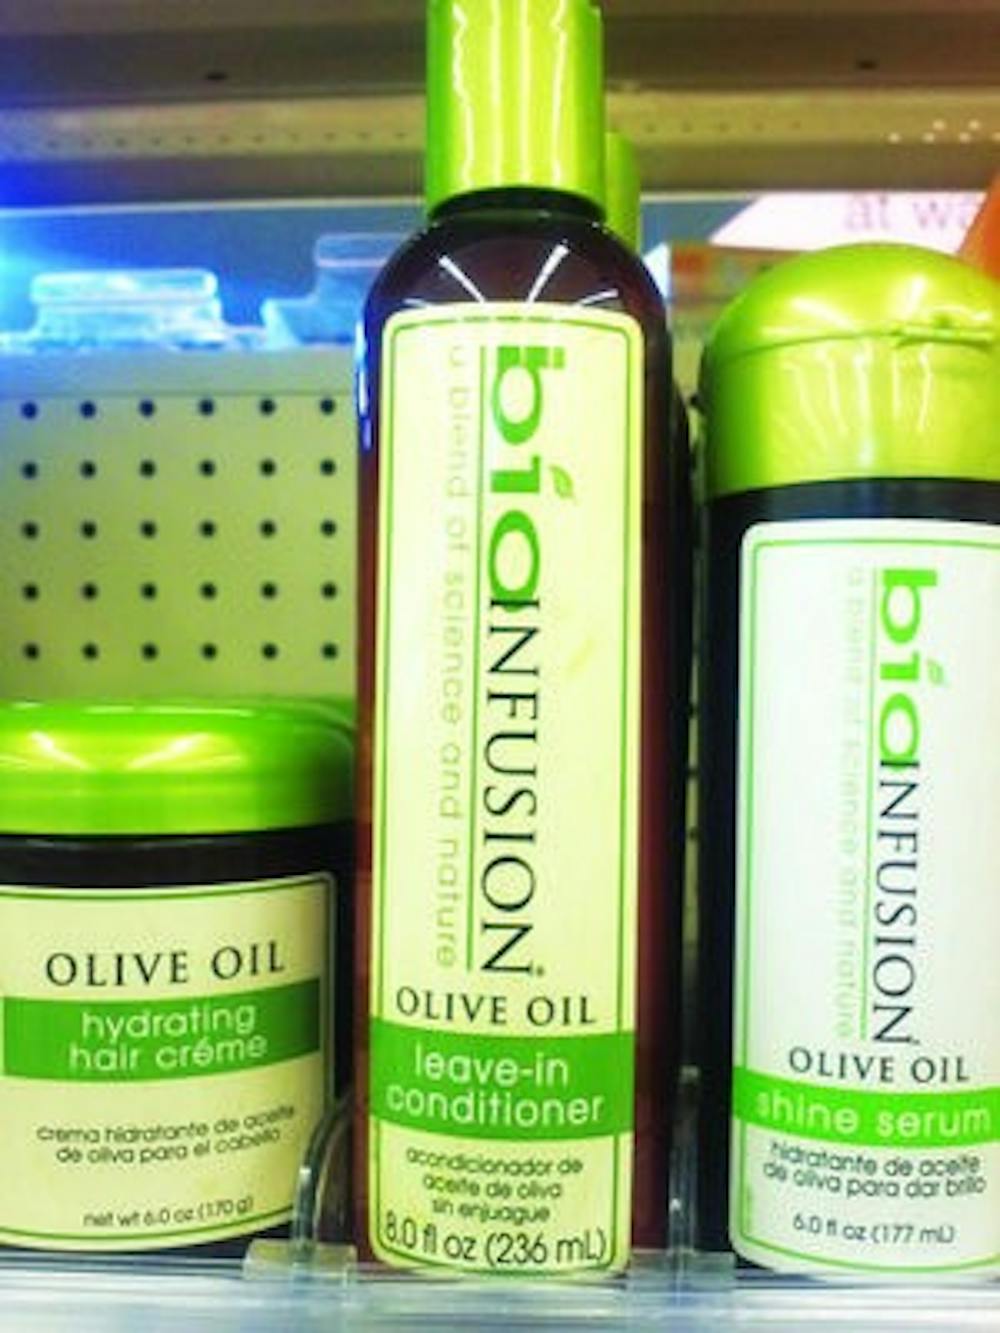 Olive oil conditioner is an alternative at-home treatement to moisturize dry hair. It can be purchased at local drugstores like CVS and Walgreens. (Raye May / ASSOCIATE INTRIGUE EDITOR)